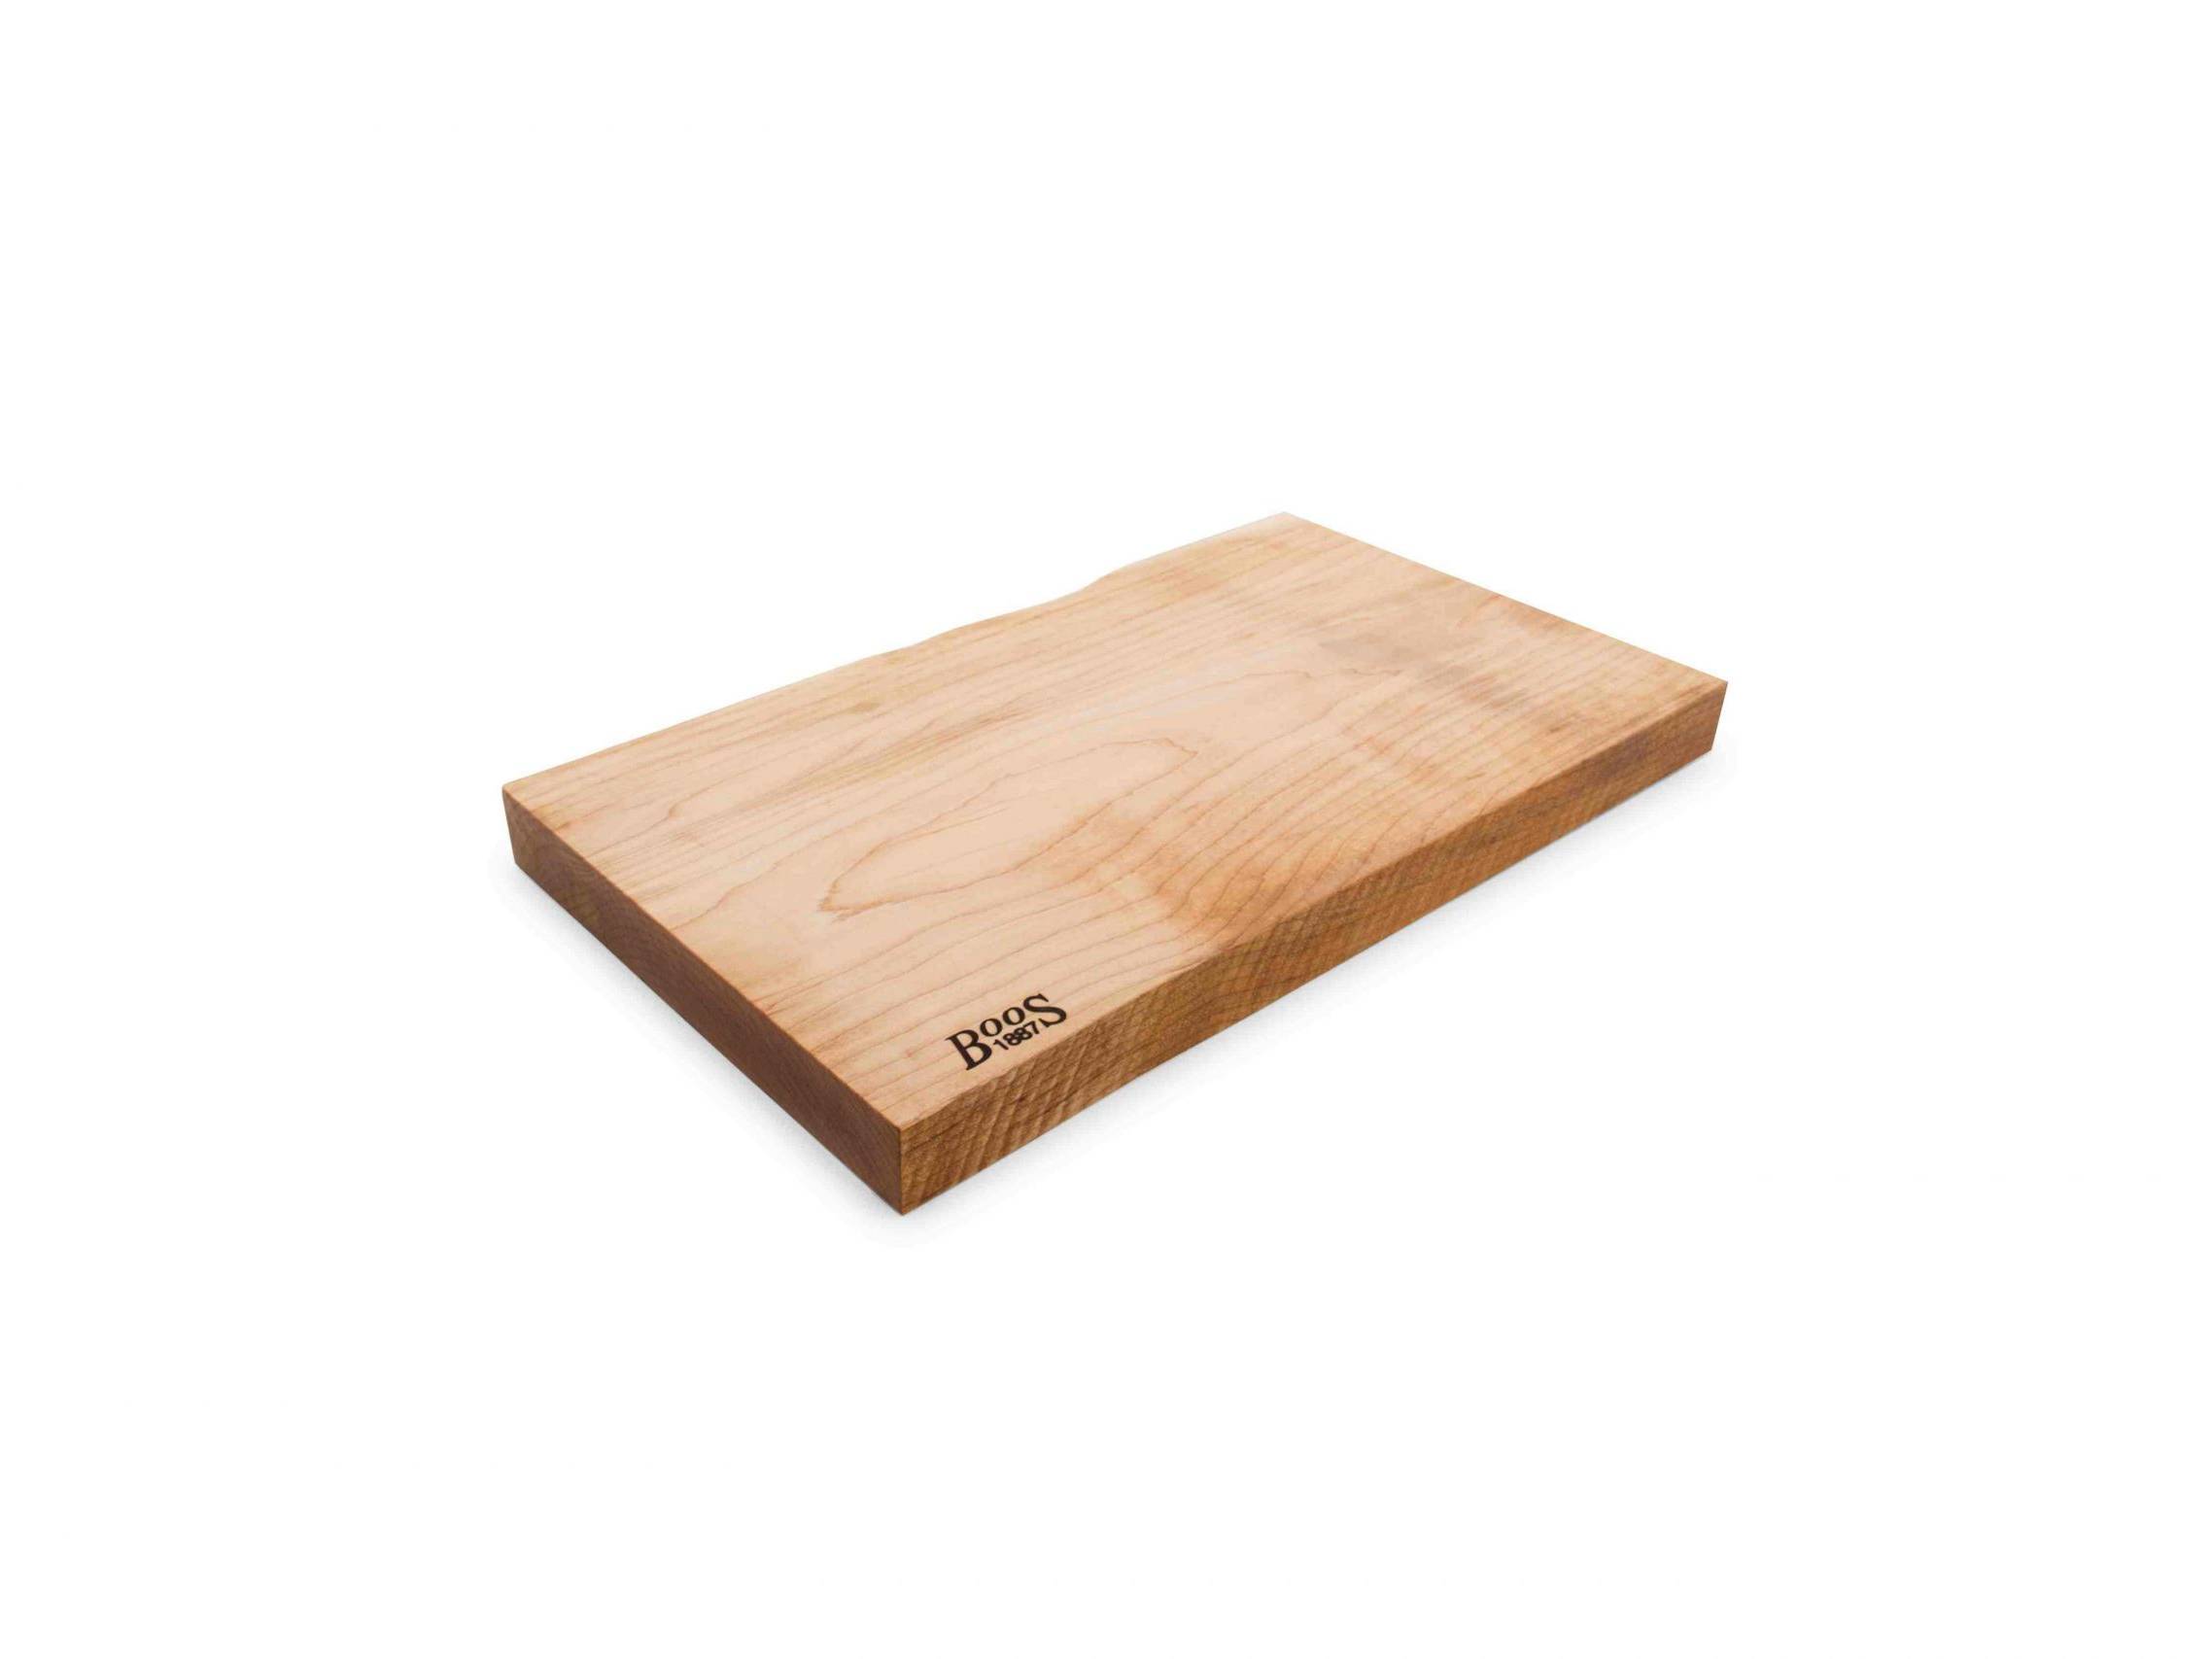 Boos 1887 / Rustic Edge one piece cutting board; hard maple; can be used on both sides 39